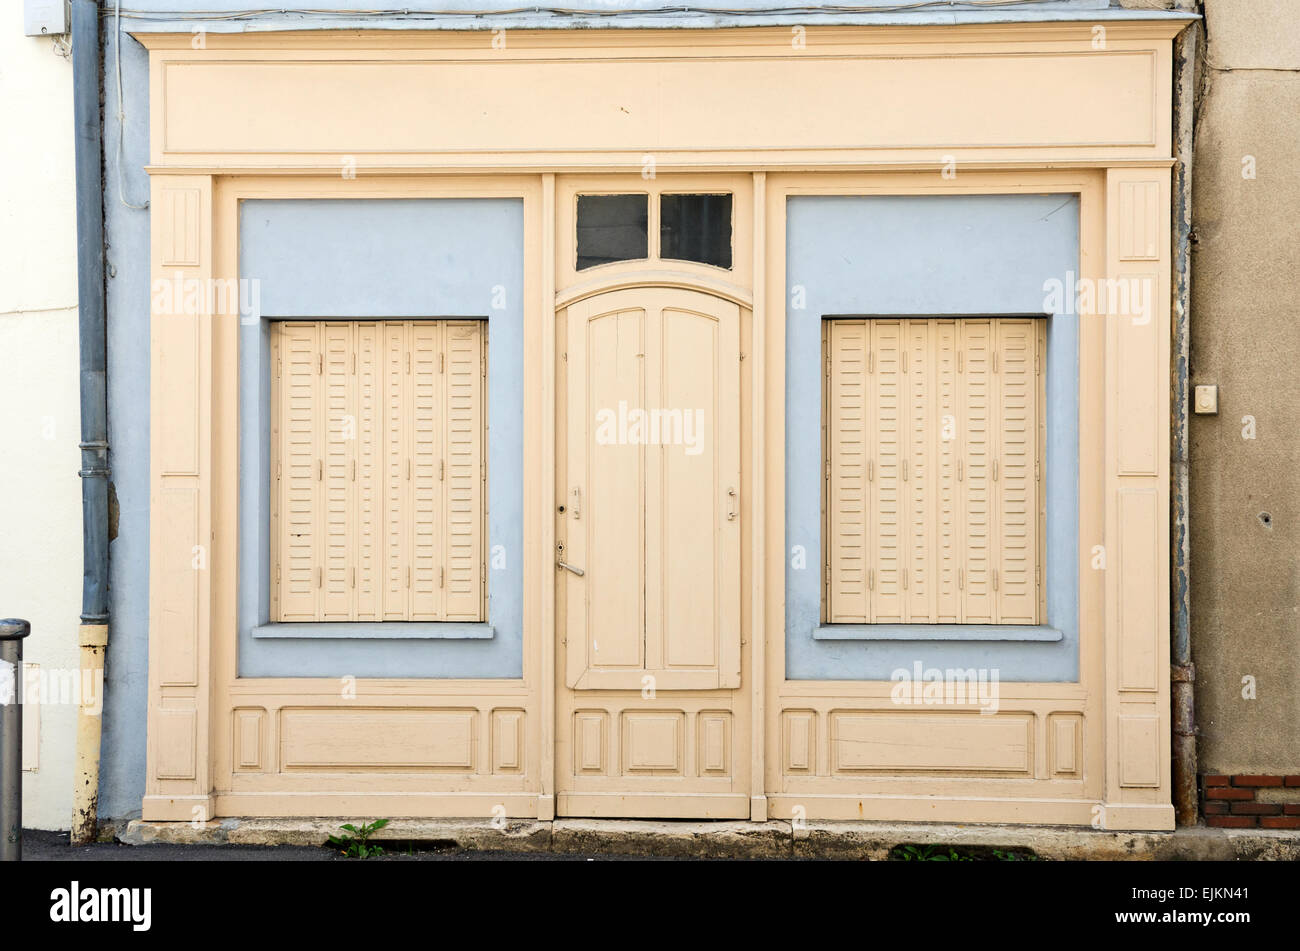 A picturesque storefront in the town of Chagny, Saone et Loire, Burgundy, France. Stock Photo